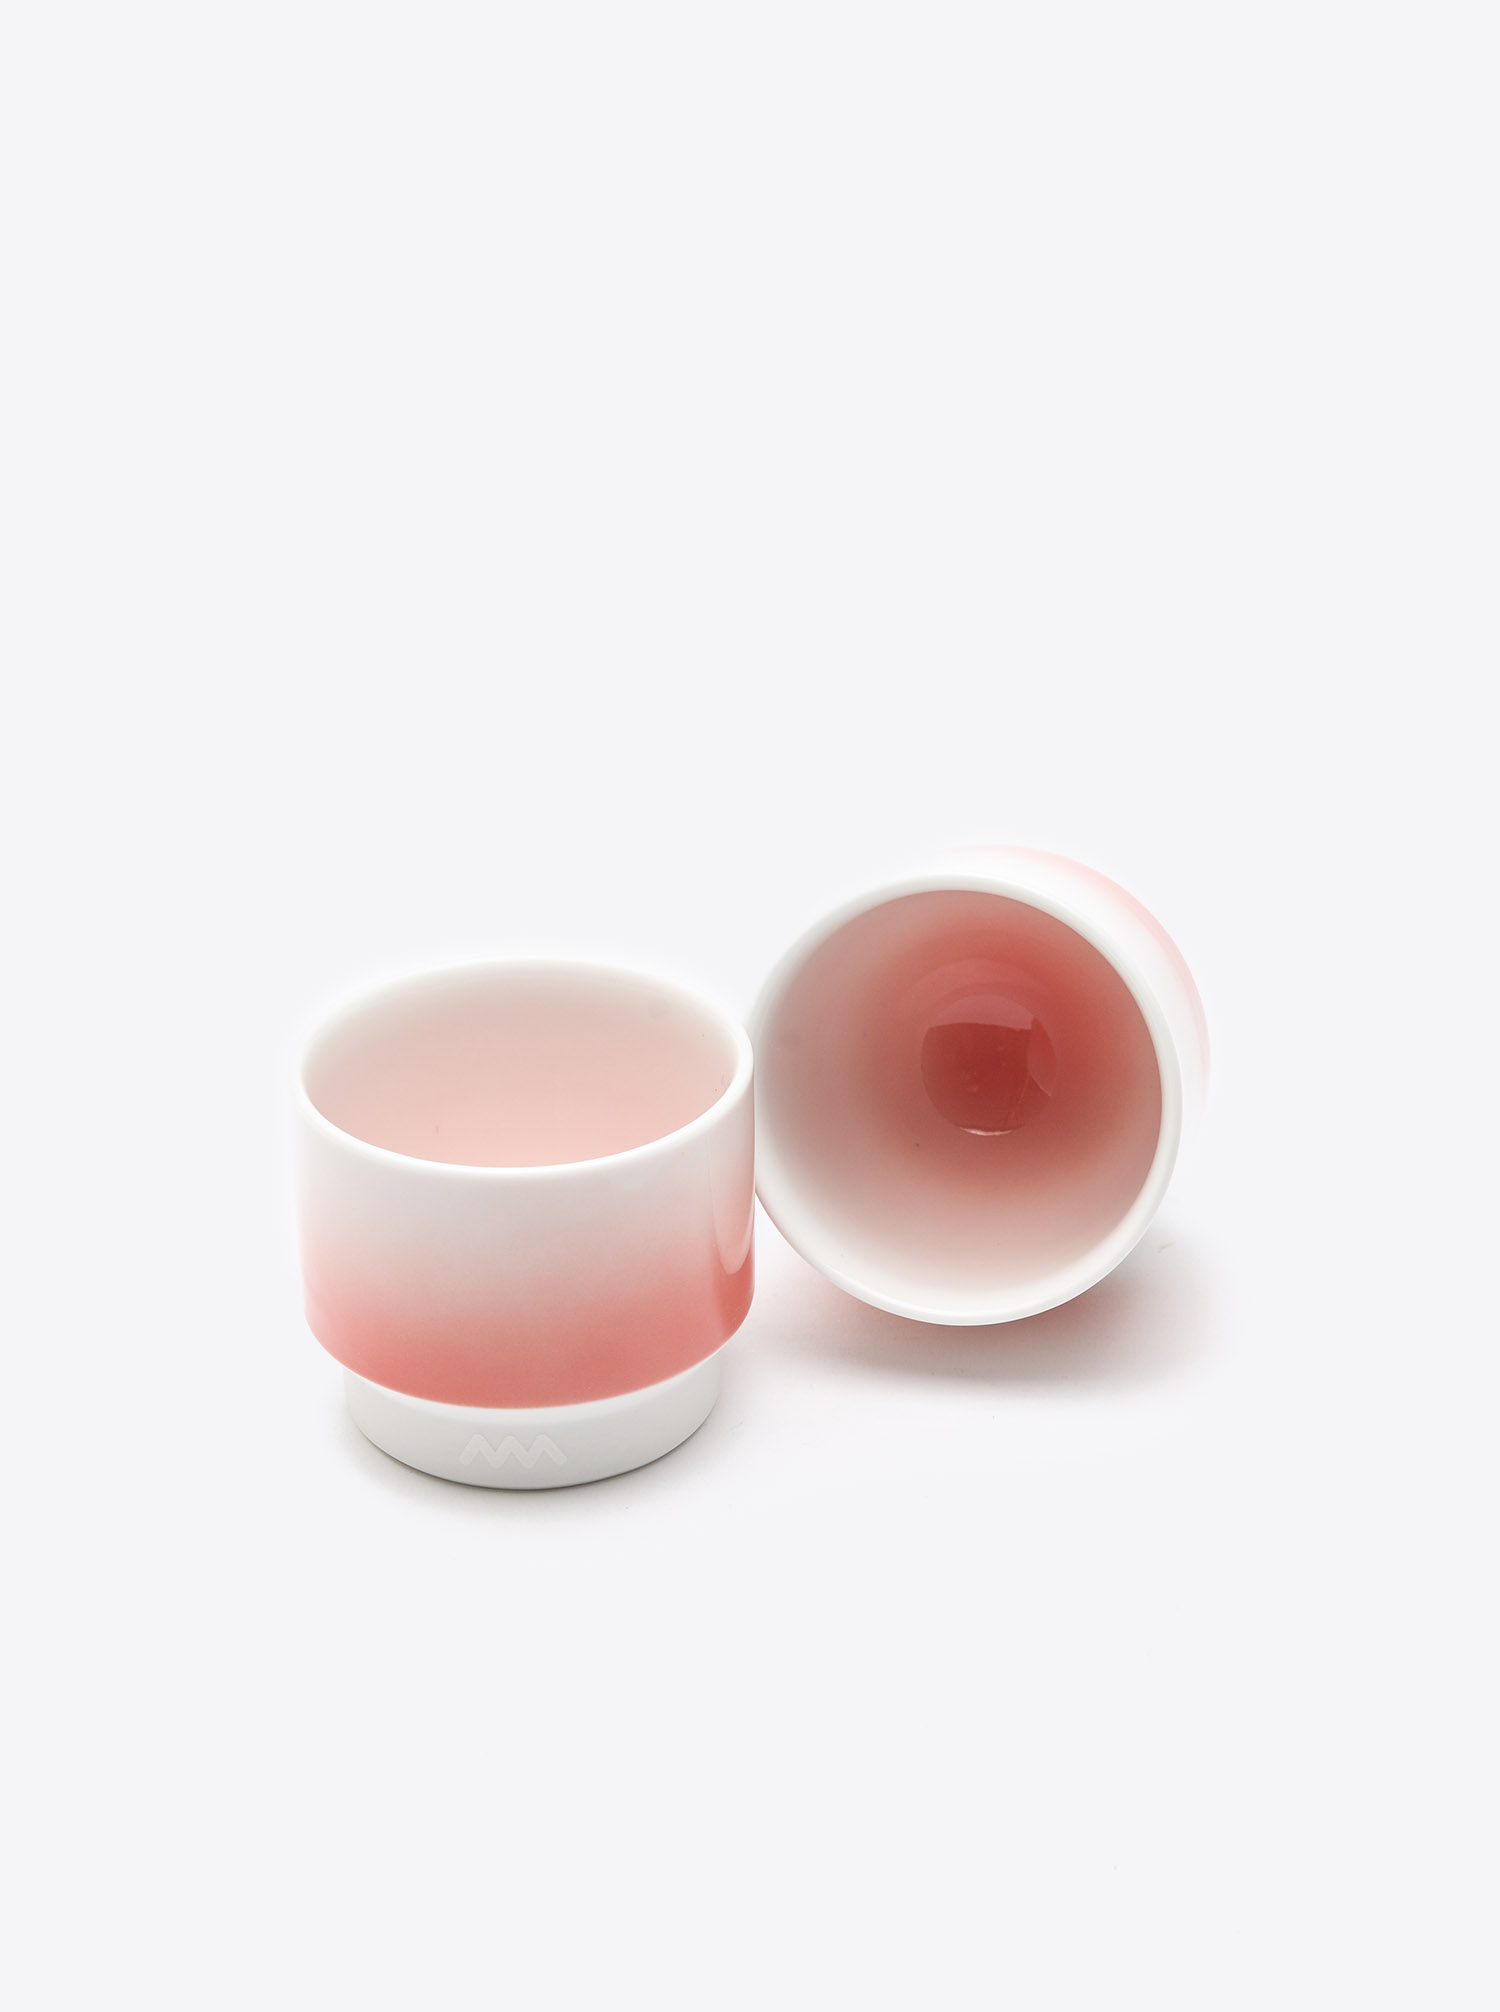 Teacup Hasami M red